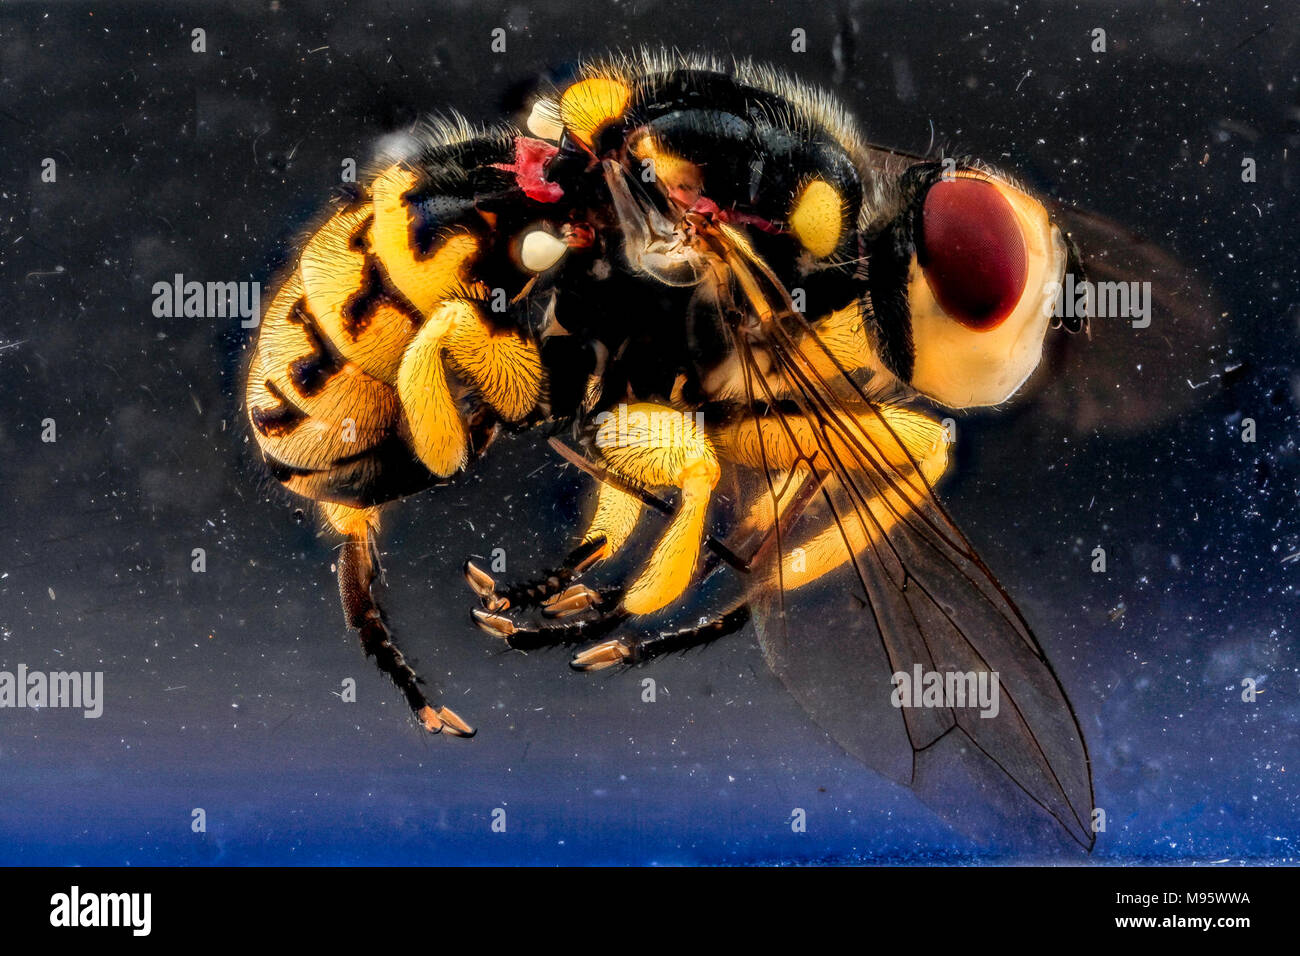 Dalmannia pacifica Fly, side, Fossil Butte Stock Photo